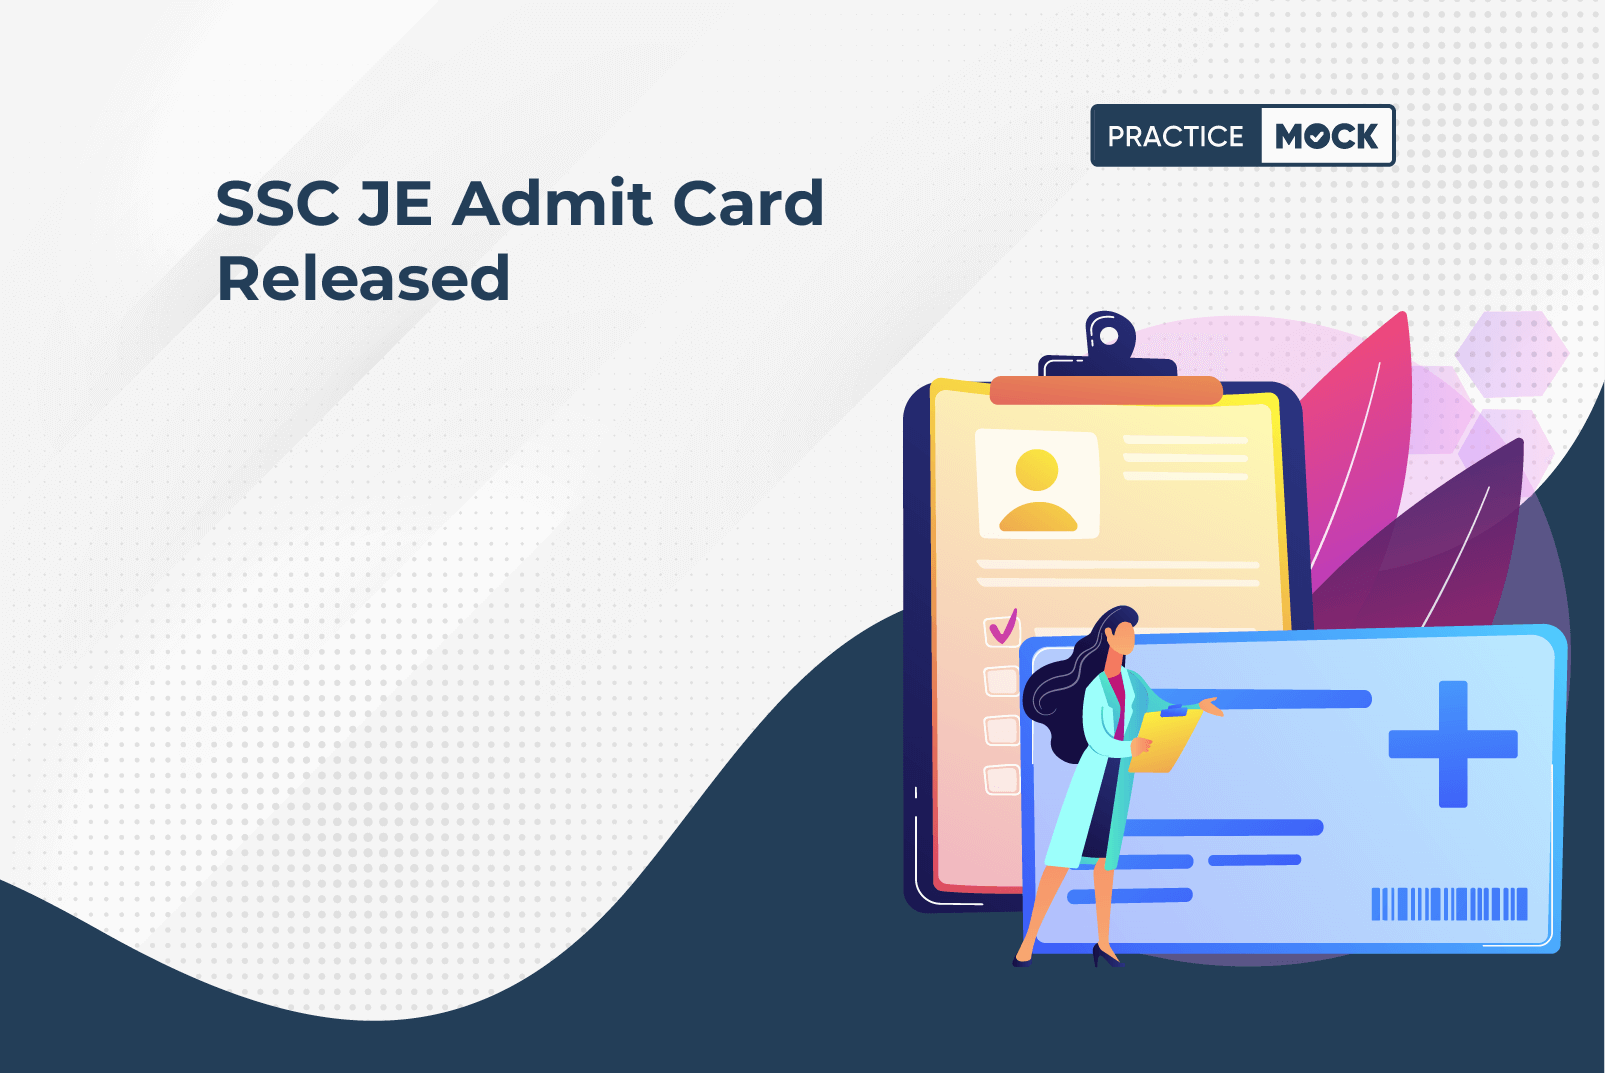 SSC JE Admit Card Released (1)